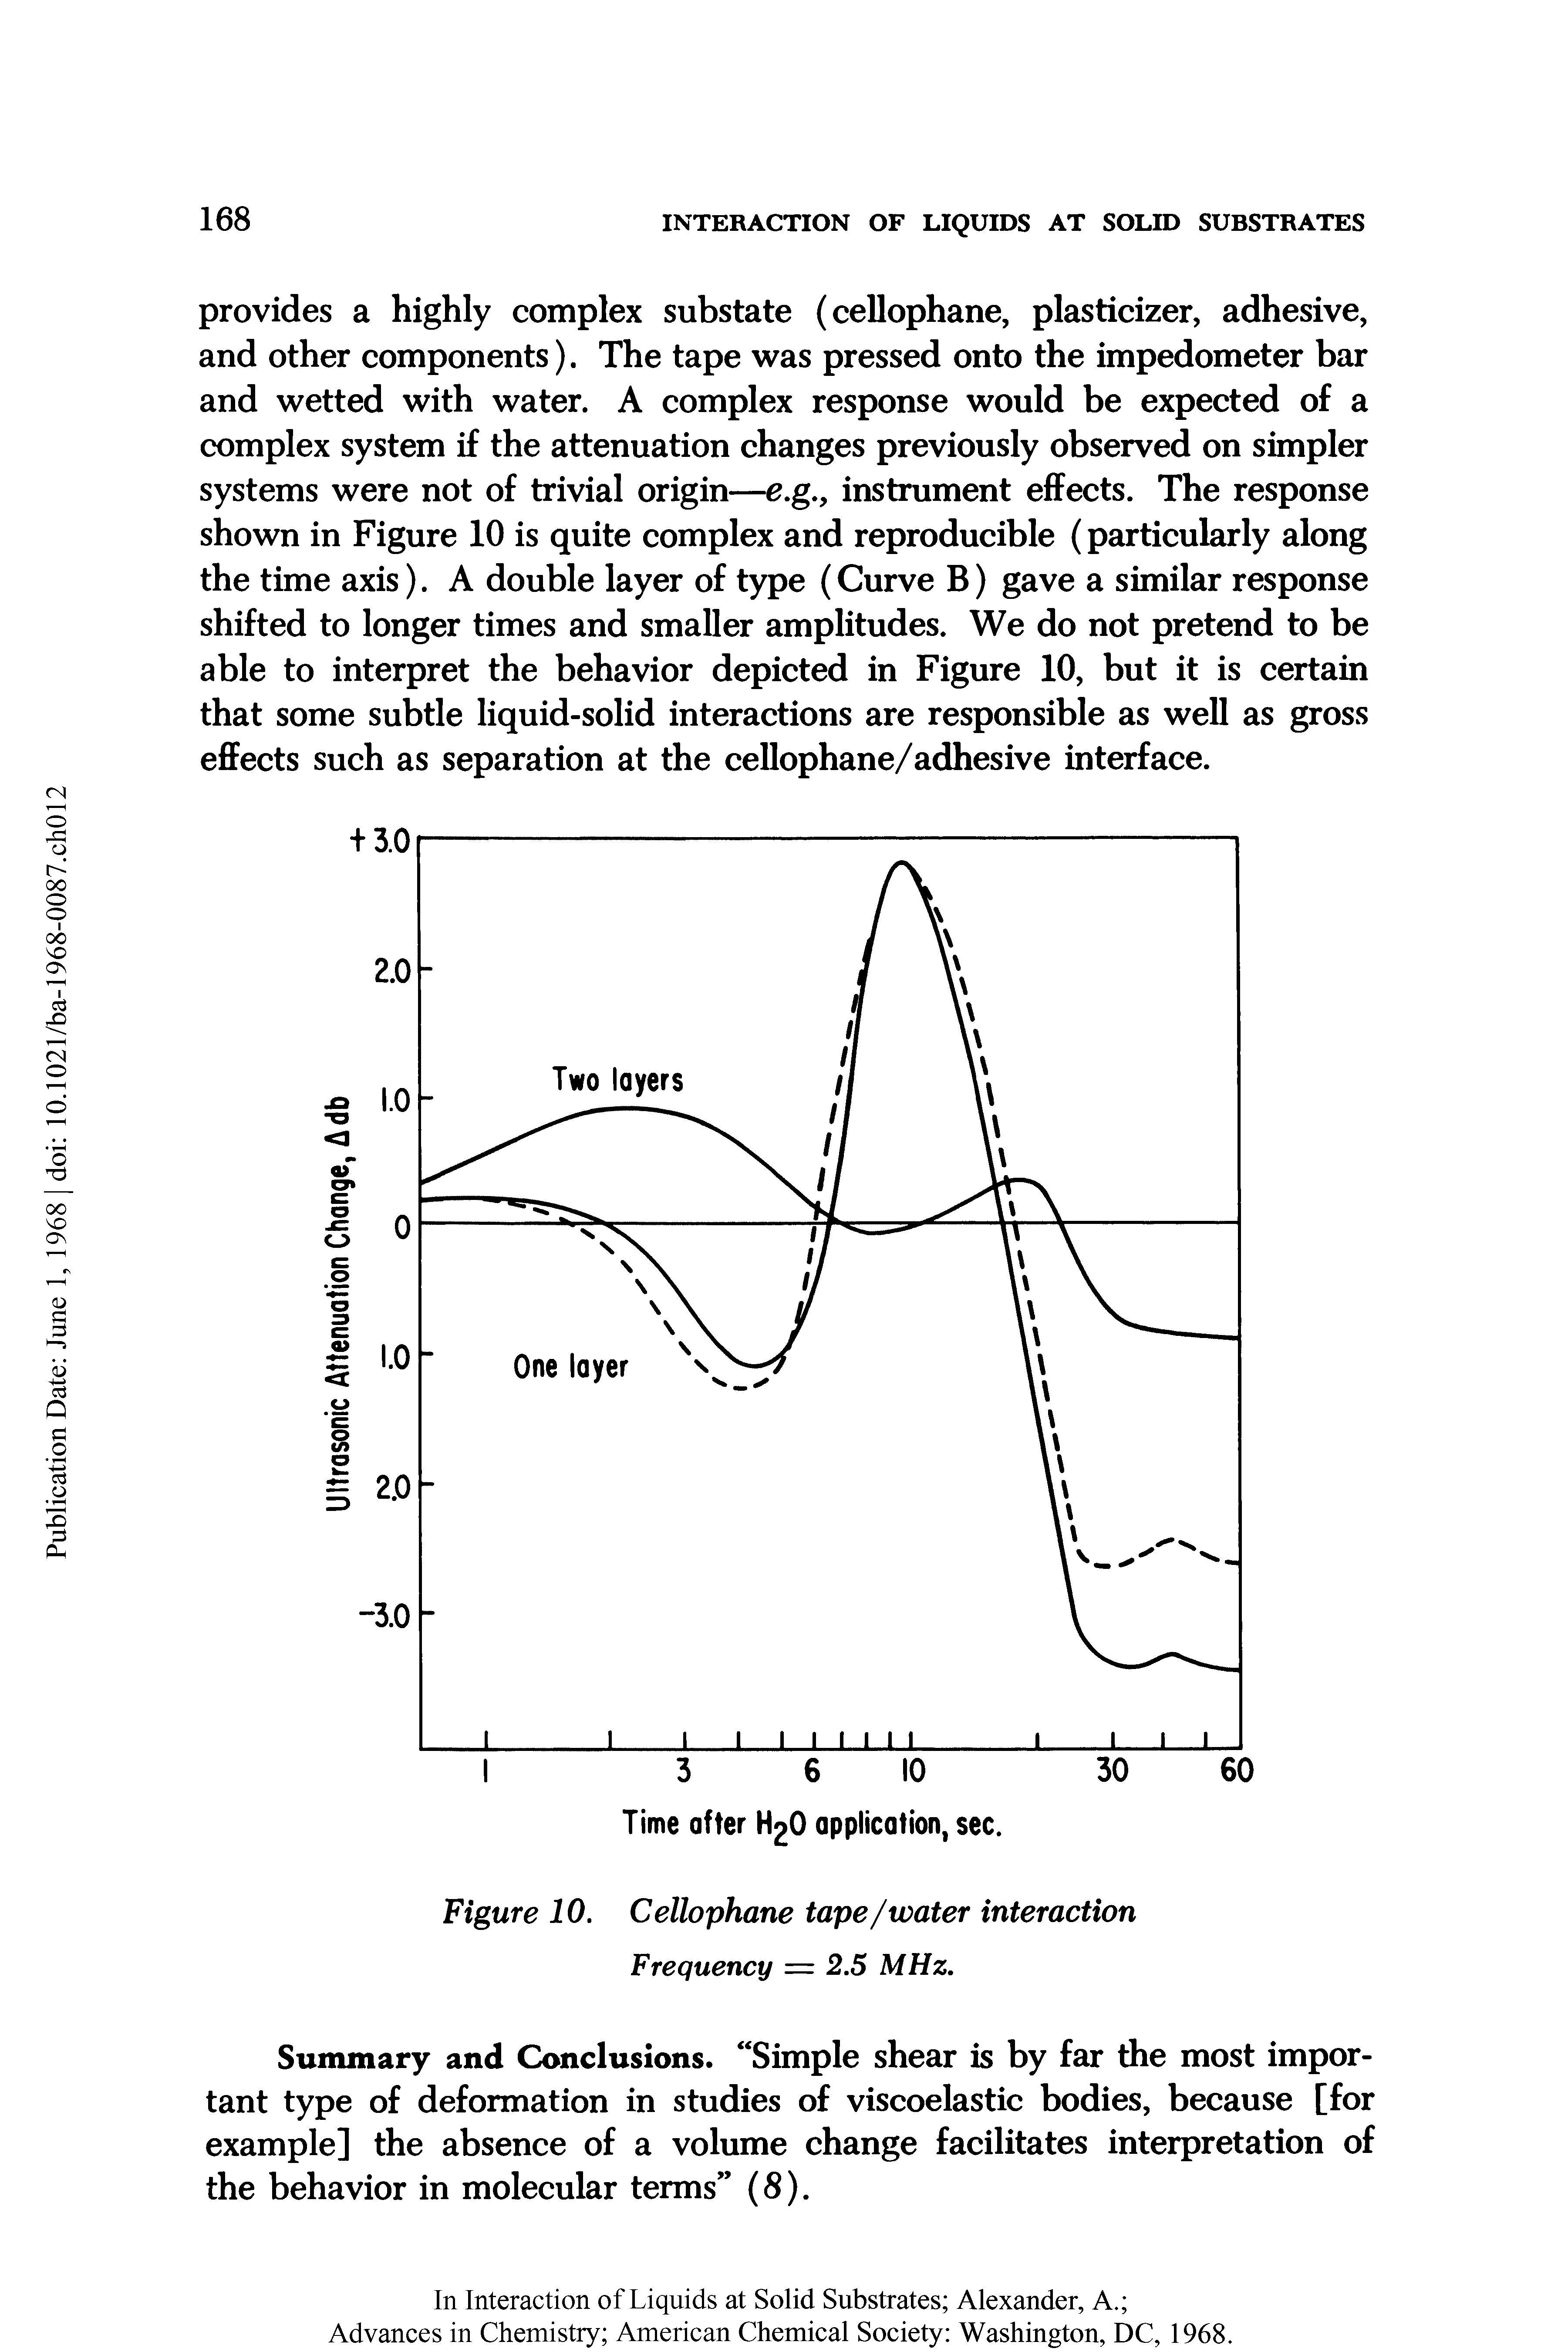 Figure 10. Cellophane tape/water interaction Frequency = 2.5 MHz.